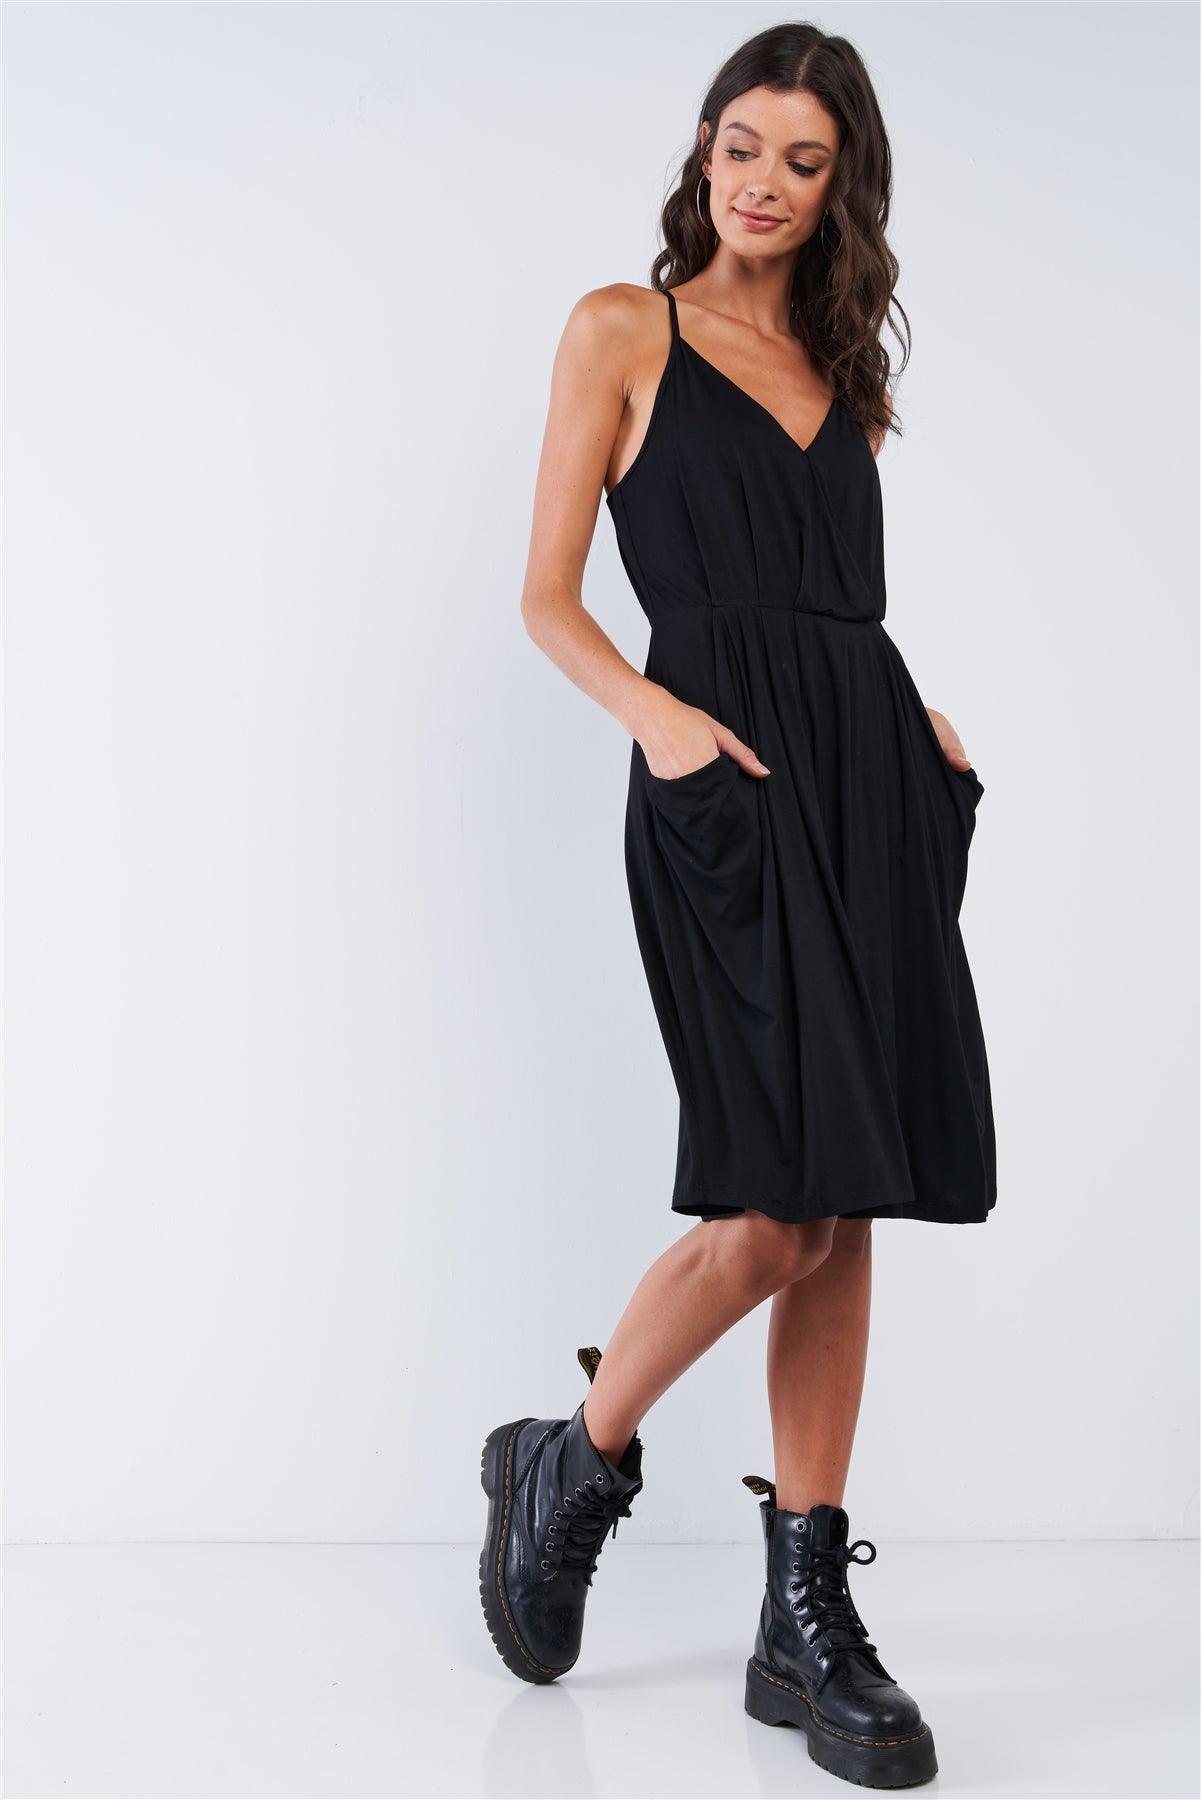 Black Casual Pleated Wrap Deep Plunge V-Neck Sleeveless Mini Dress With Front Pockets